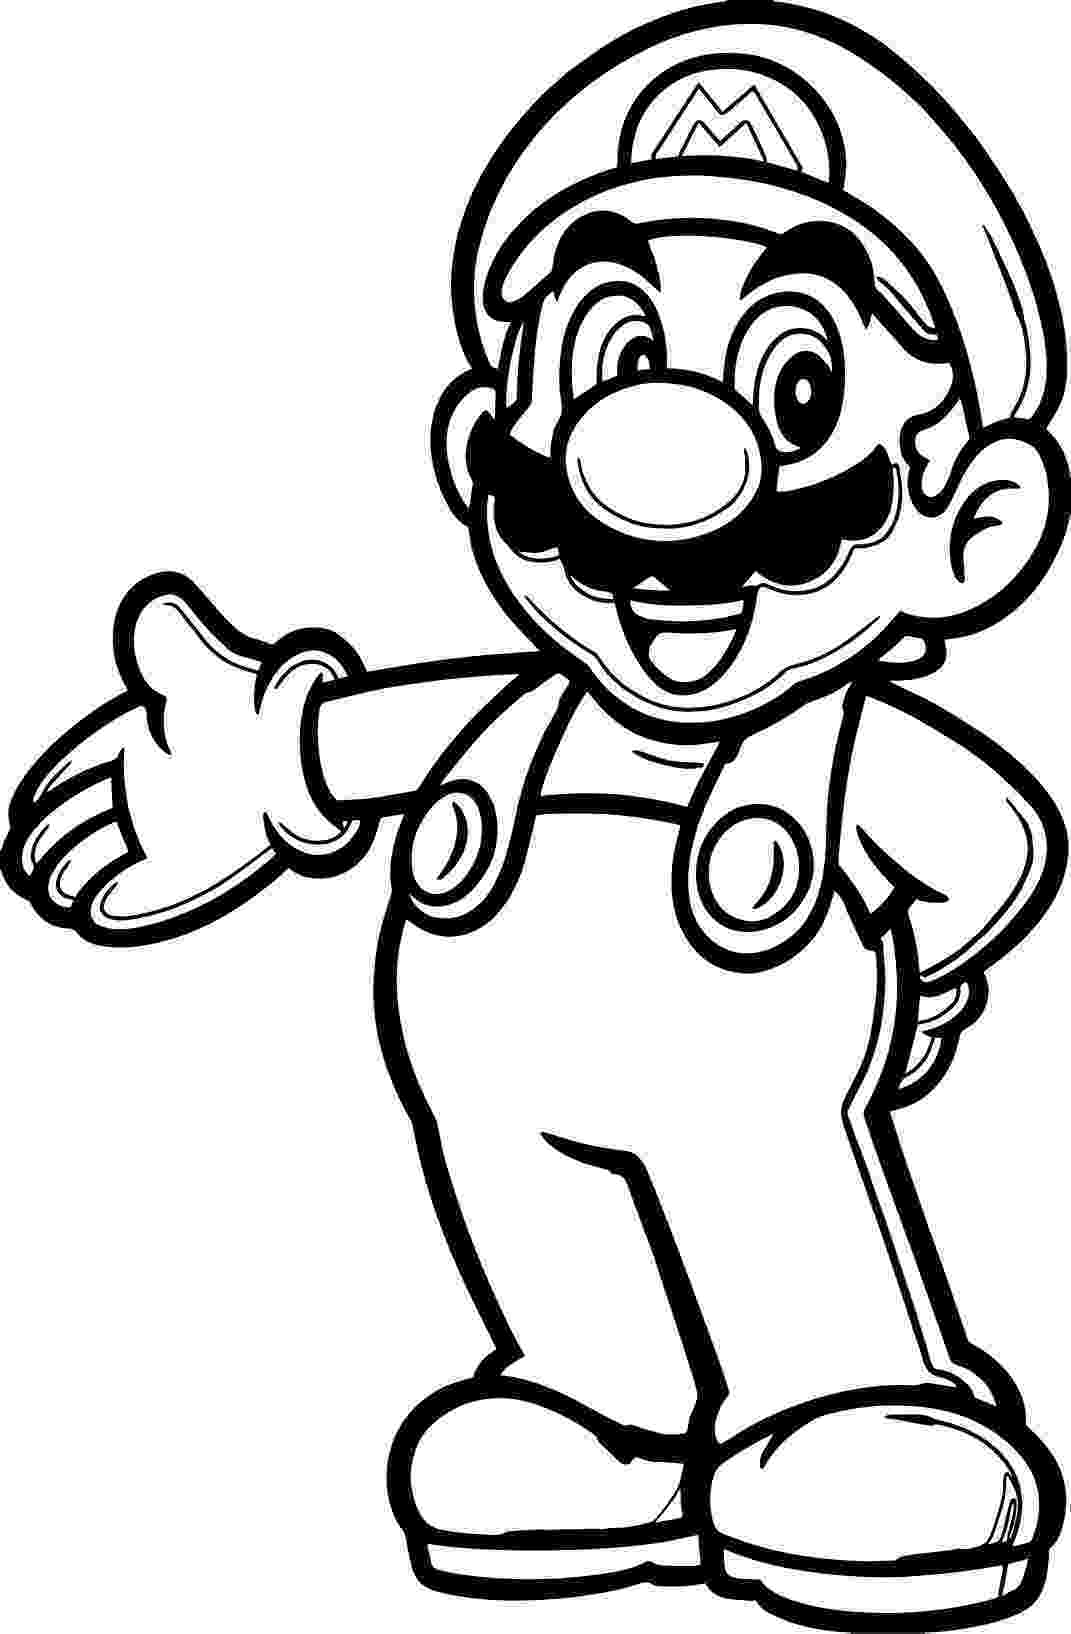 mario pictures mario coloring pages to print minister coloring pictures mario 